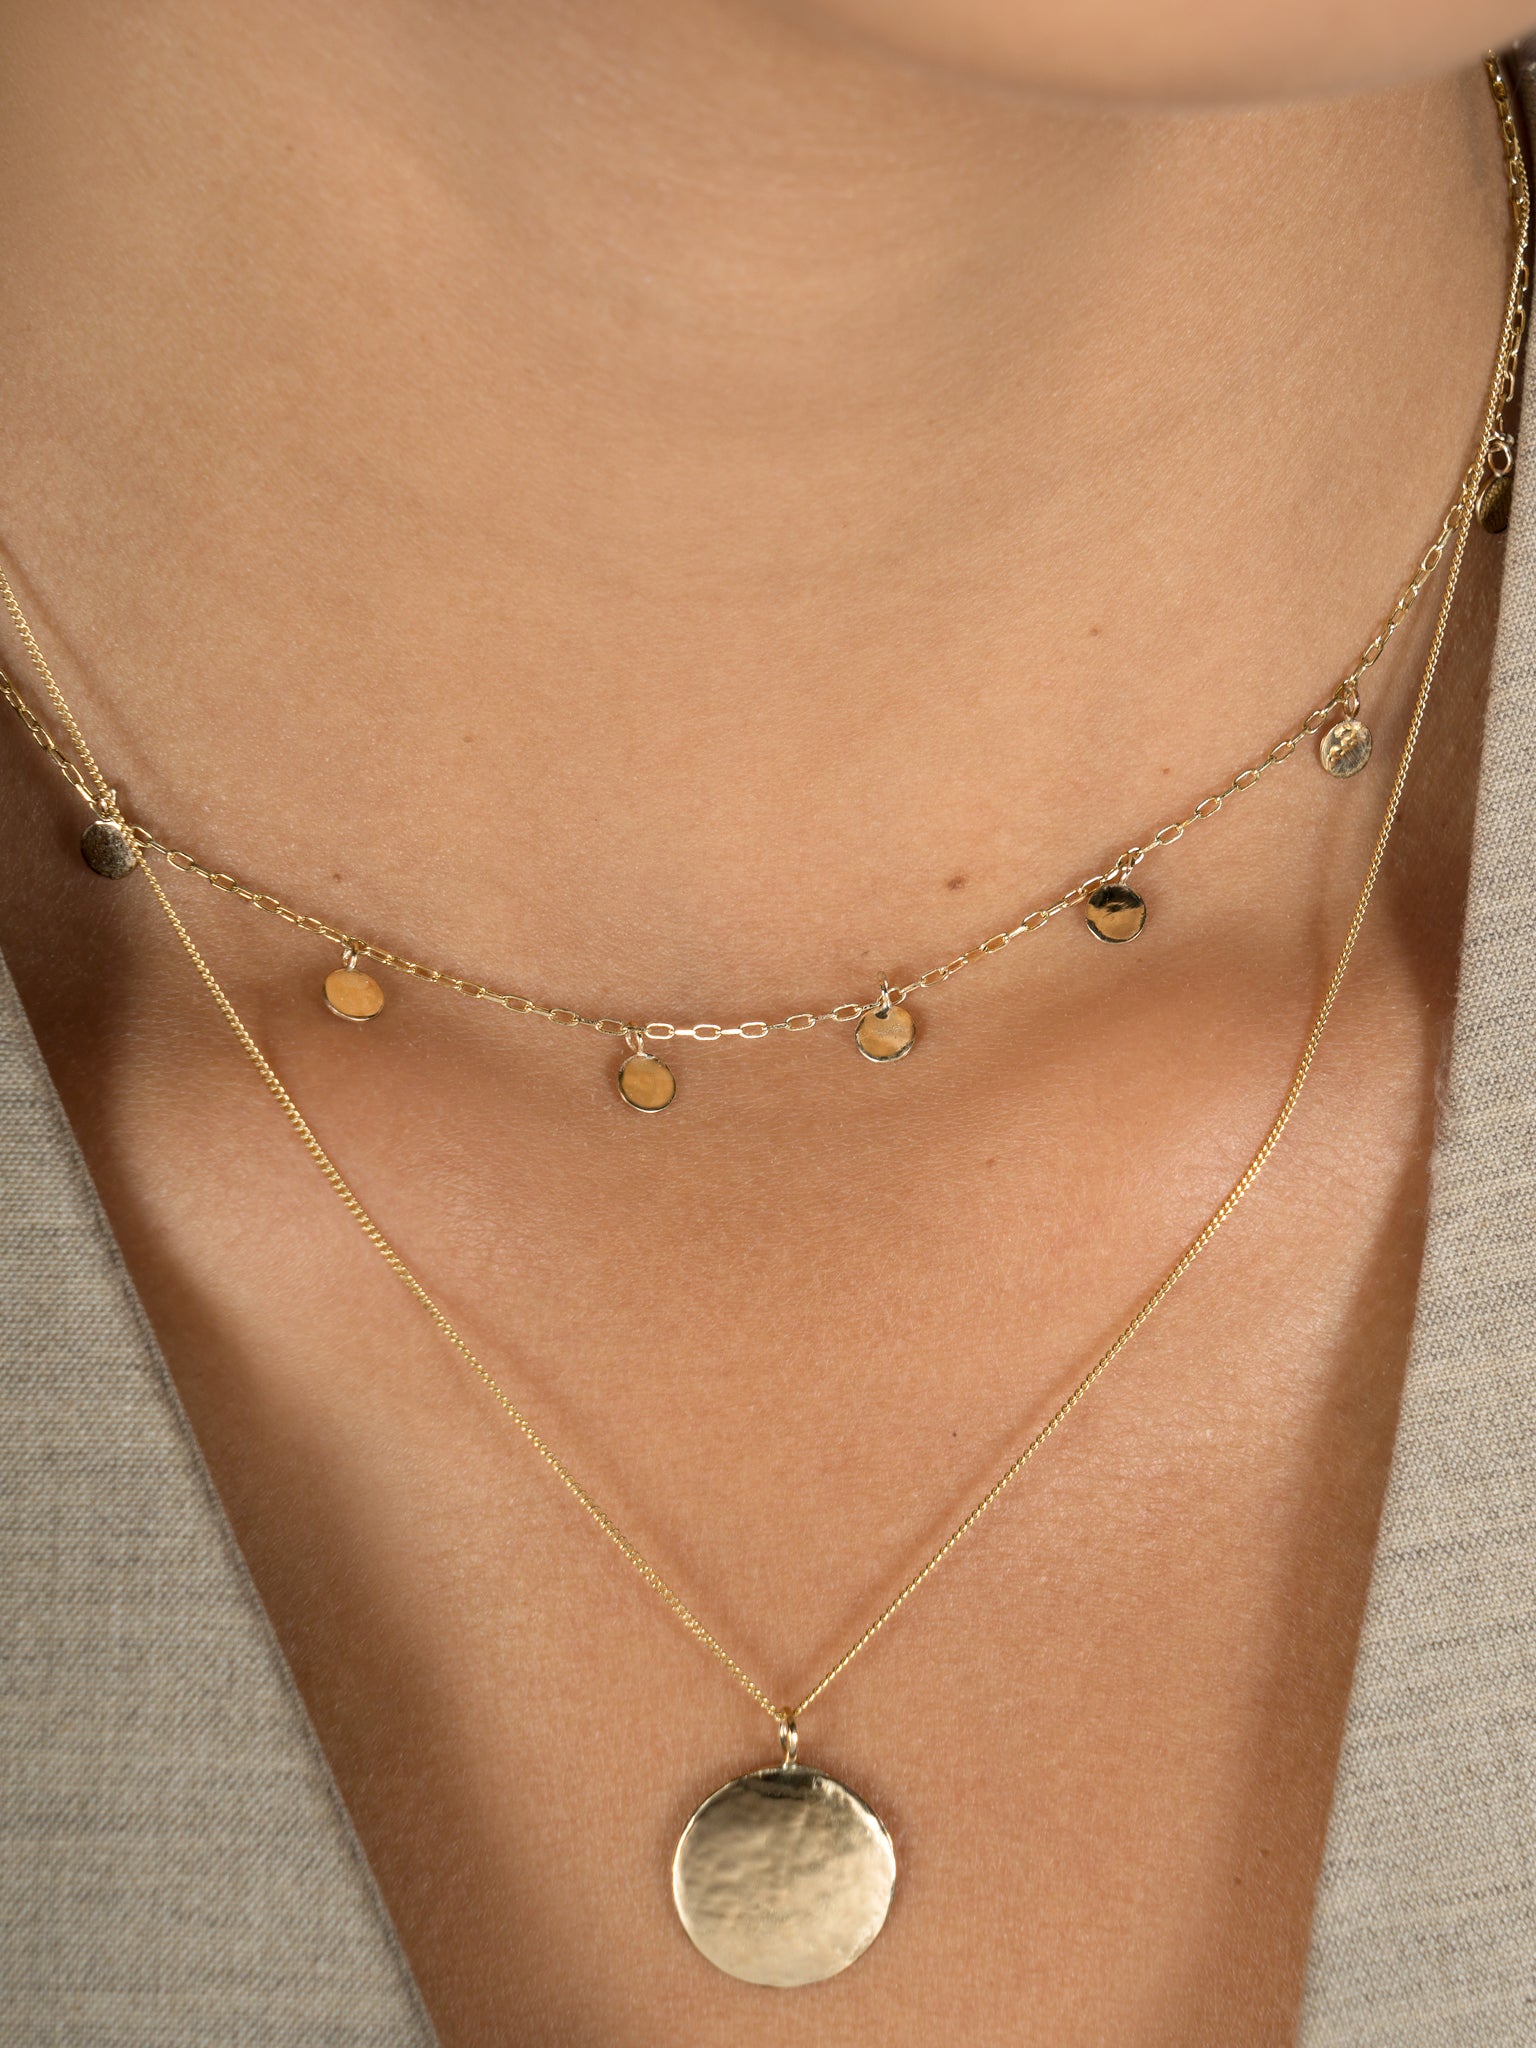 Elegant and Simple Multi-Layer Necklaces in Silver and Gold - Walmart.com